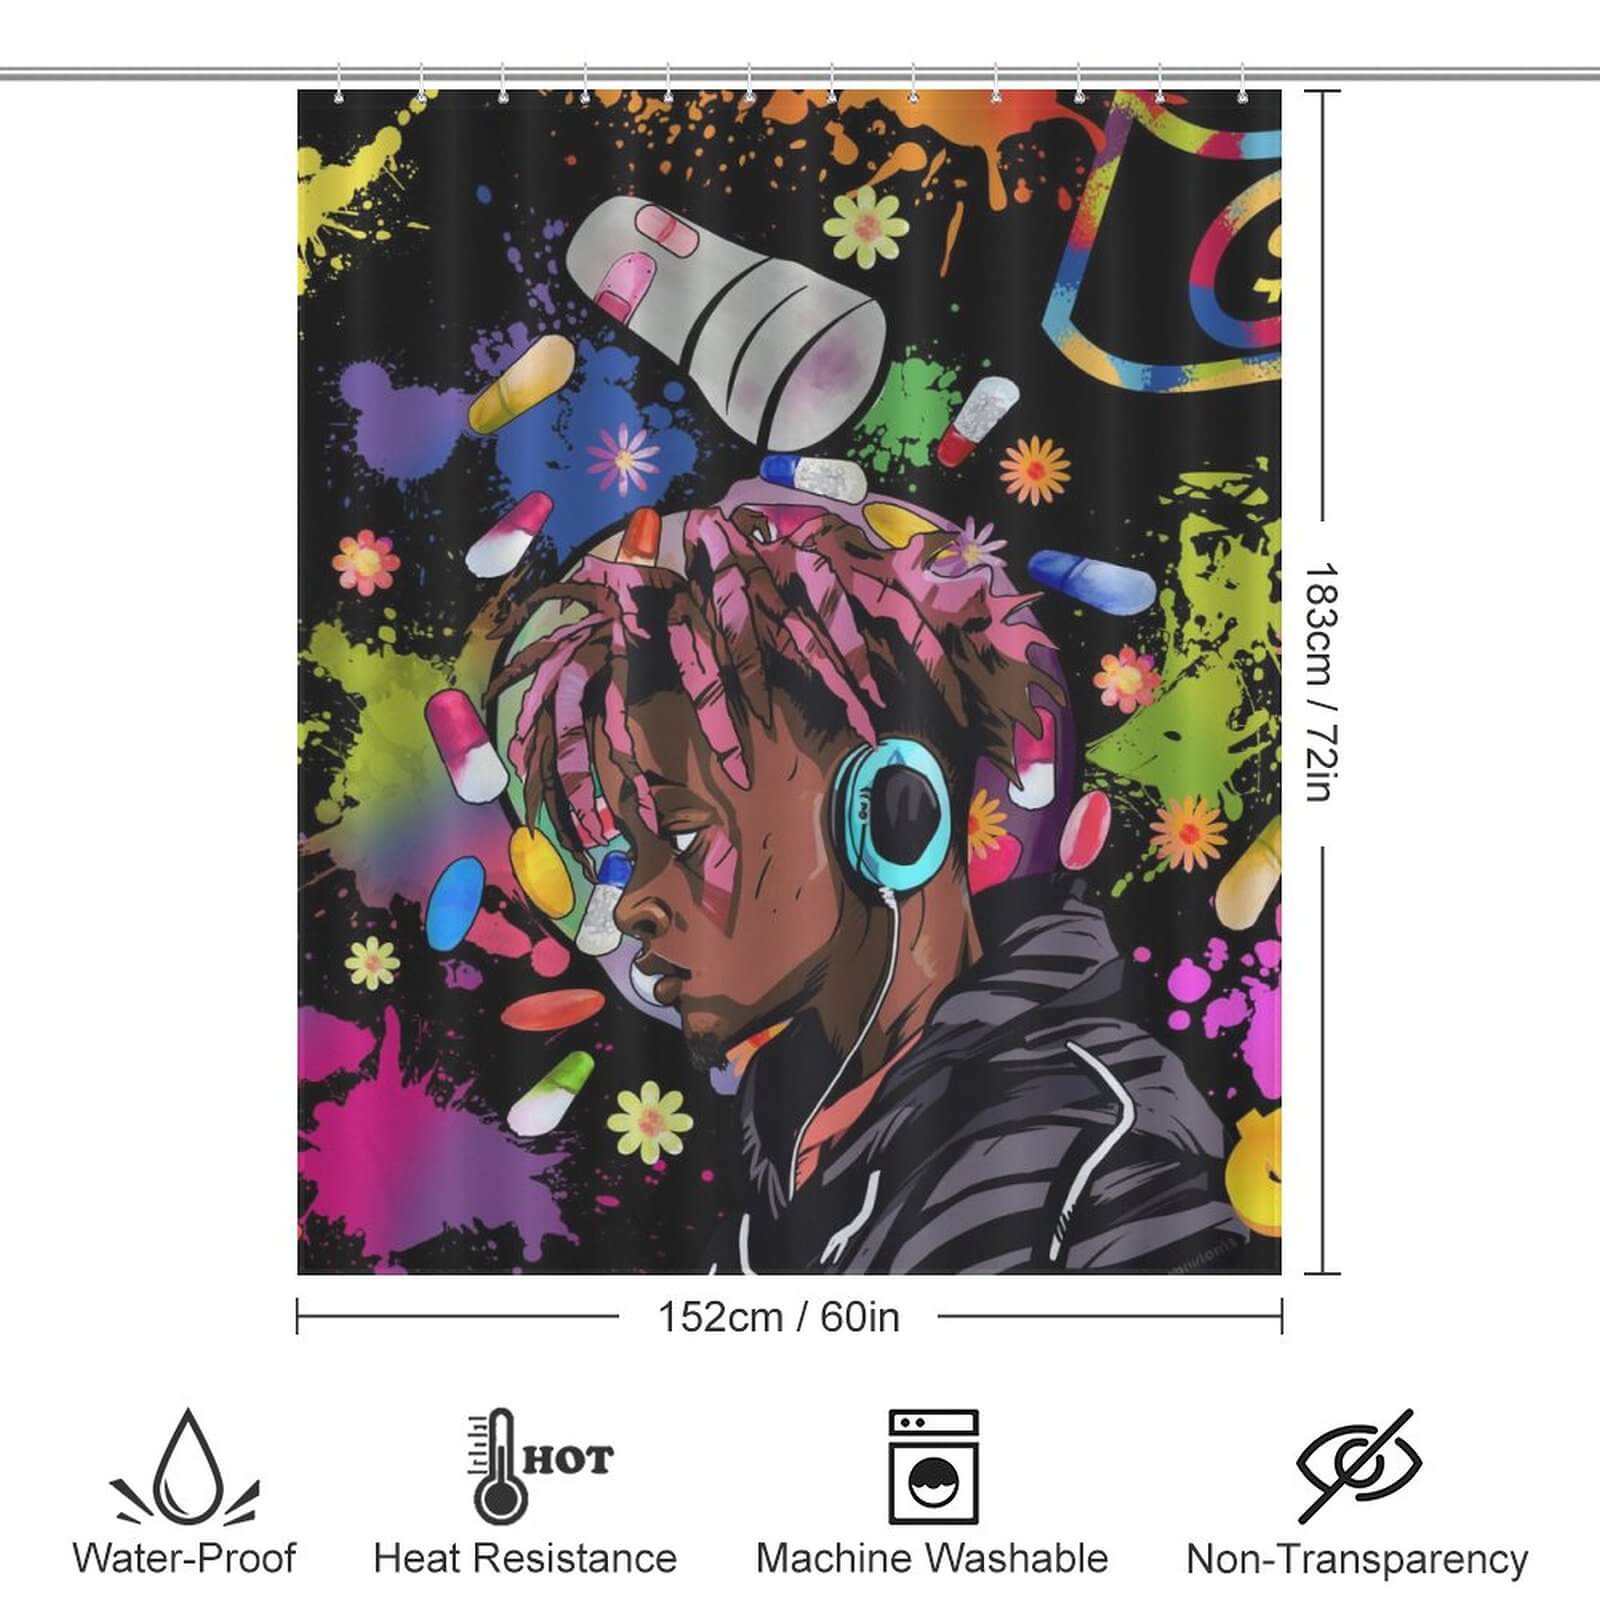 Elevate your bathroom decor with the Rapper Music Shower Curtain-Cottoncat by Cotton Cat, featuring an artistic display of splatters surrounding a girl's head, inspired by the iconic style of Juice Wrld. Transform your daily showers into a stylish and unique experience.